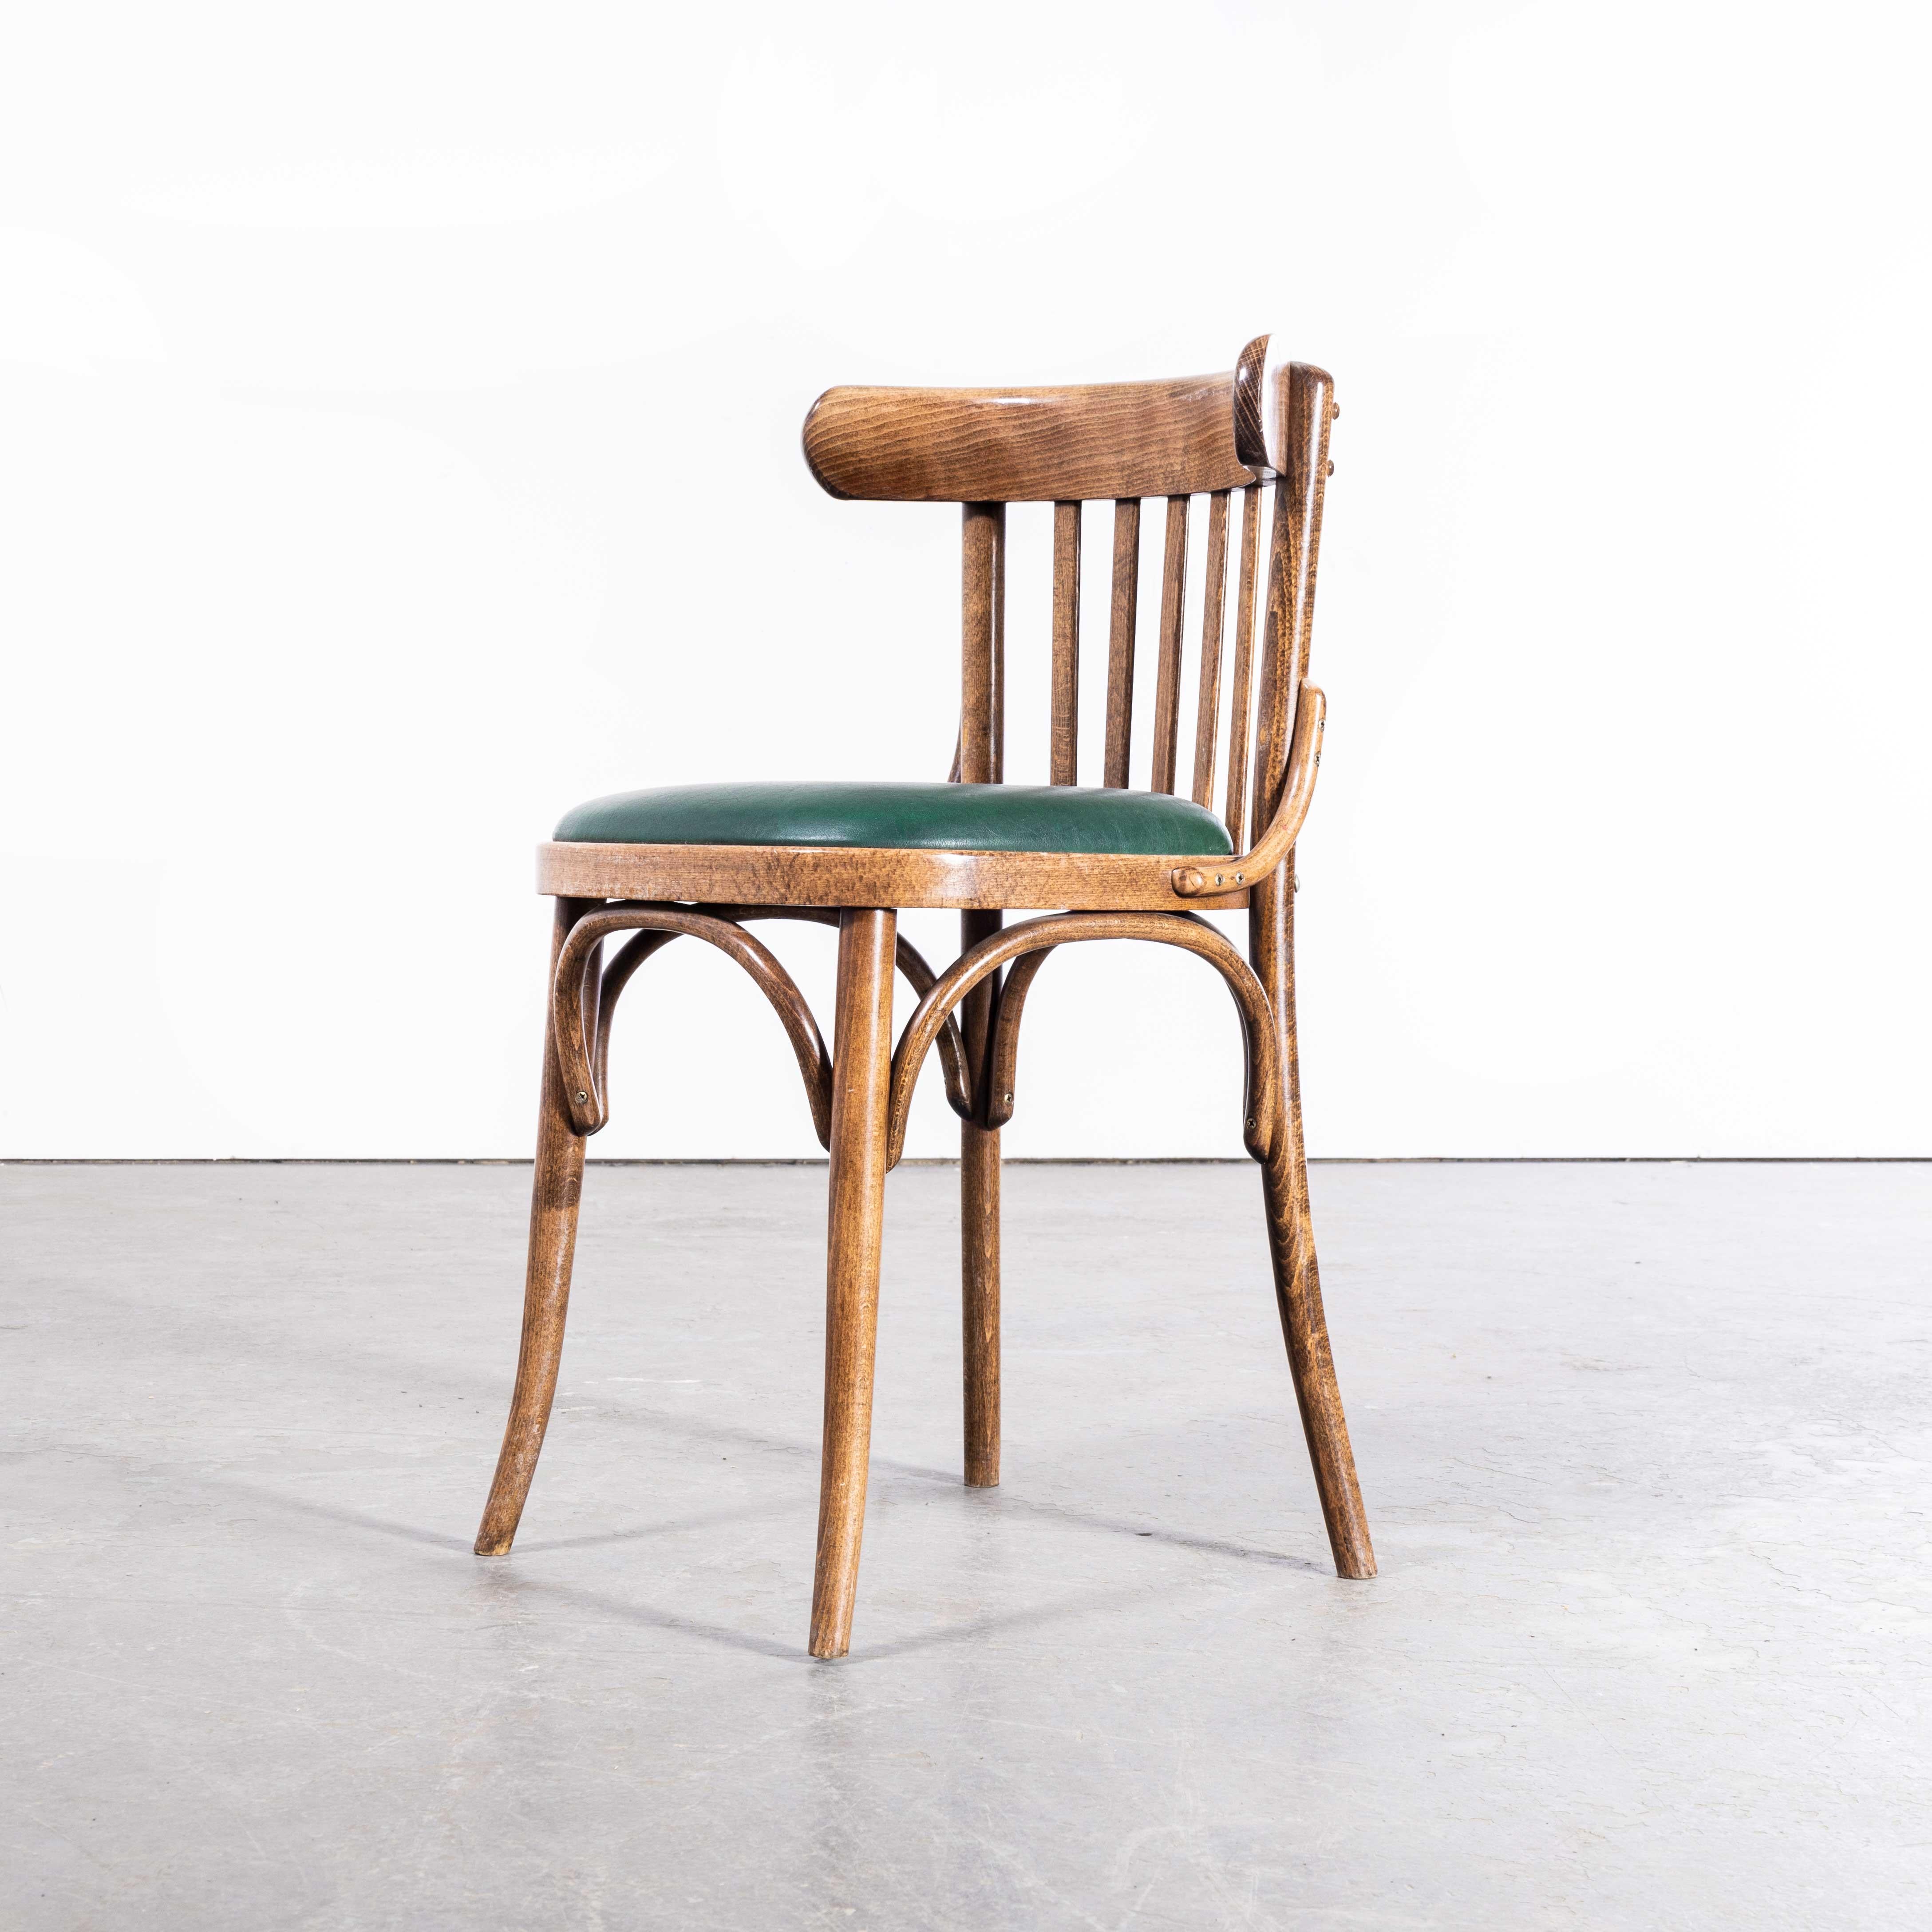 1970s Green Upholstered Bentwood Dining Chair – Set Of Thirteen
1970s Green Upholstered Bentwood Dining Chair – Set Of Thirteen. Good quality set of thirteen Classic bentwood chairs with a typical slatted saddle back design. The chairs were made in